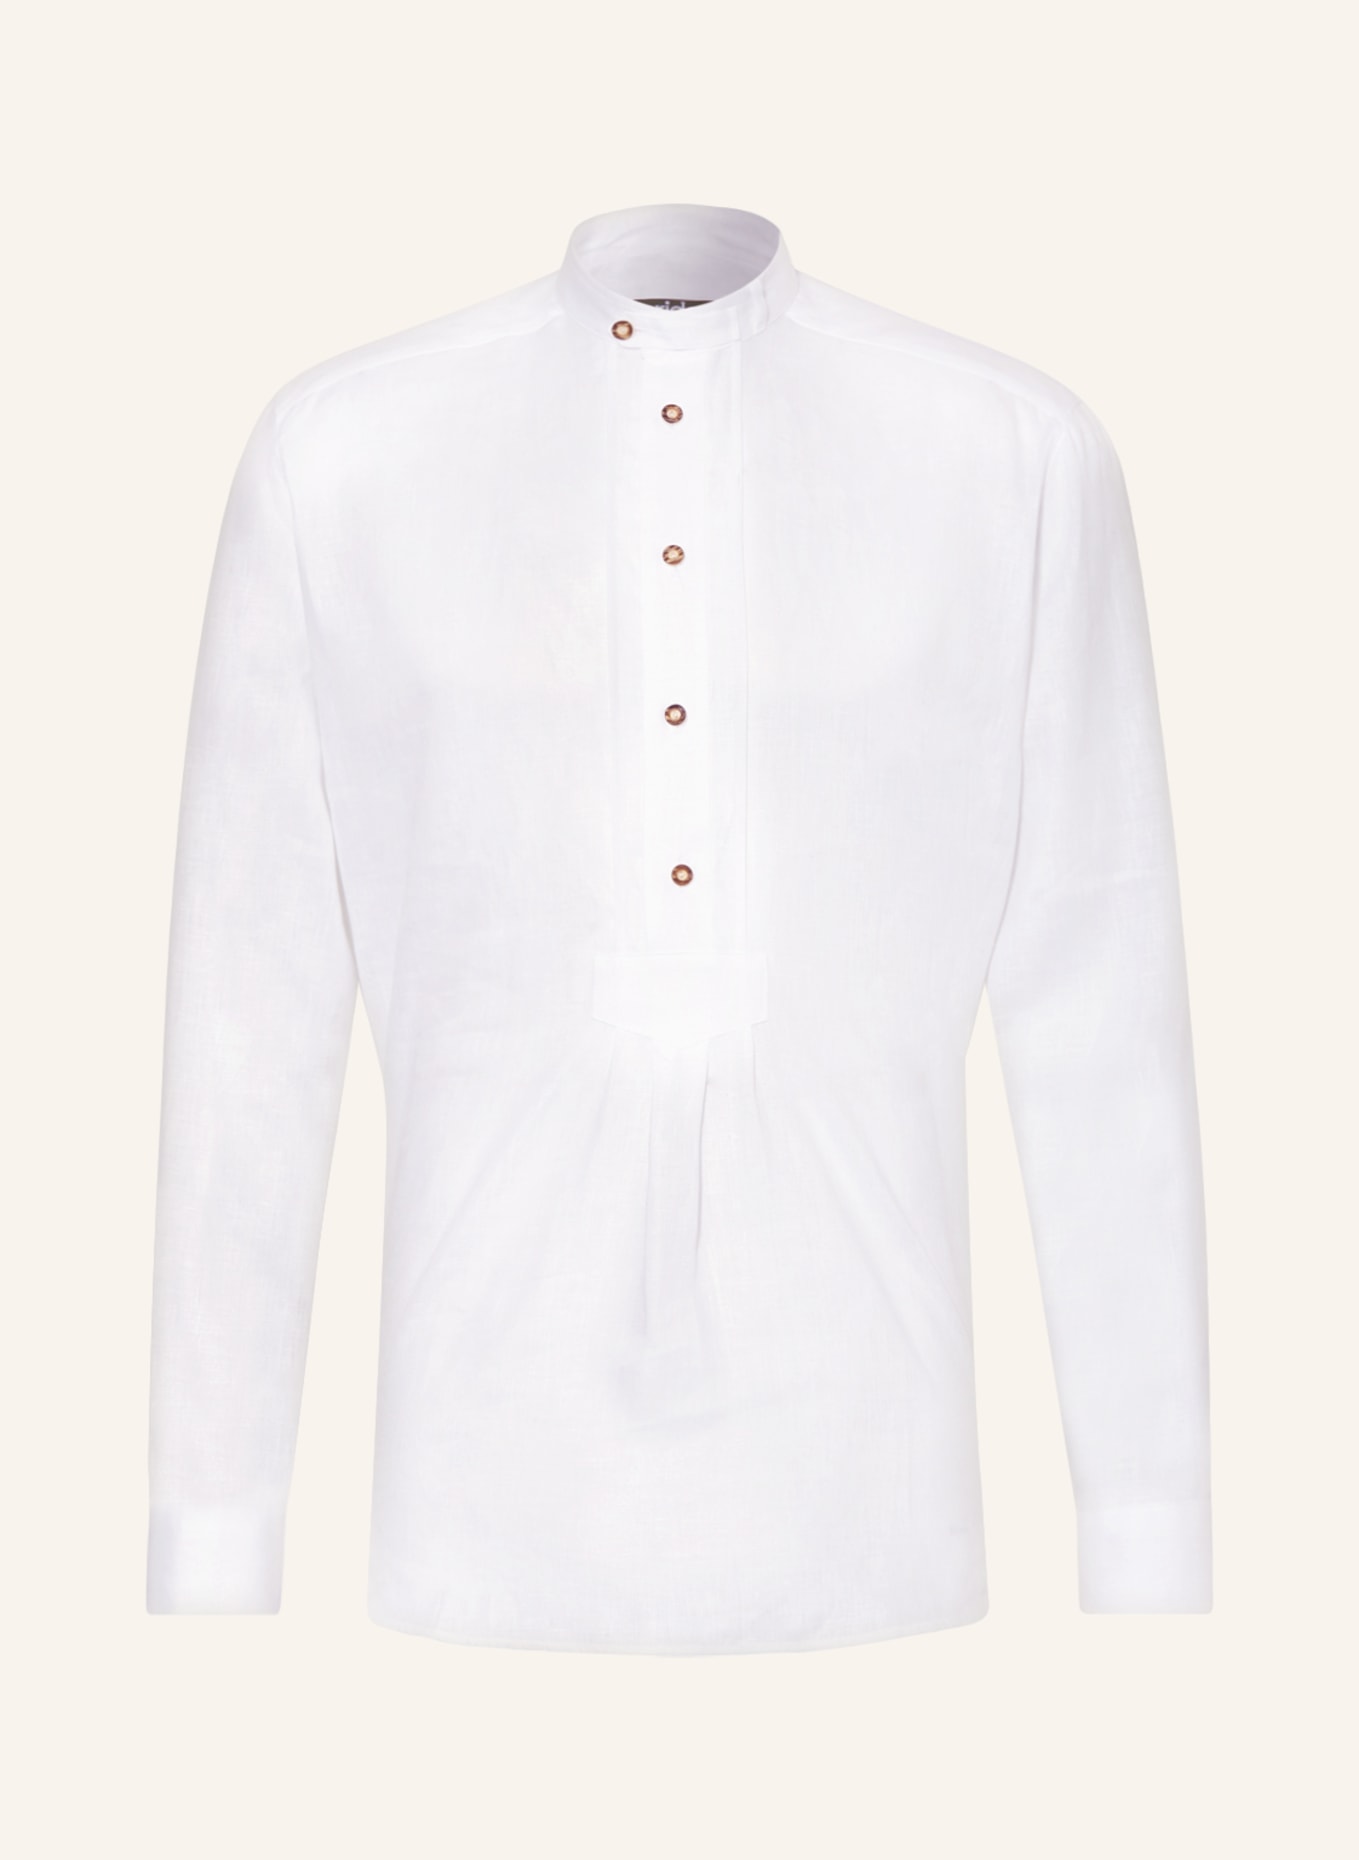 arido Trachten shirt regular fit made of linen with stand-up collar in white